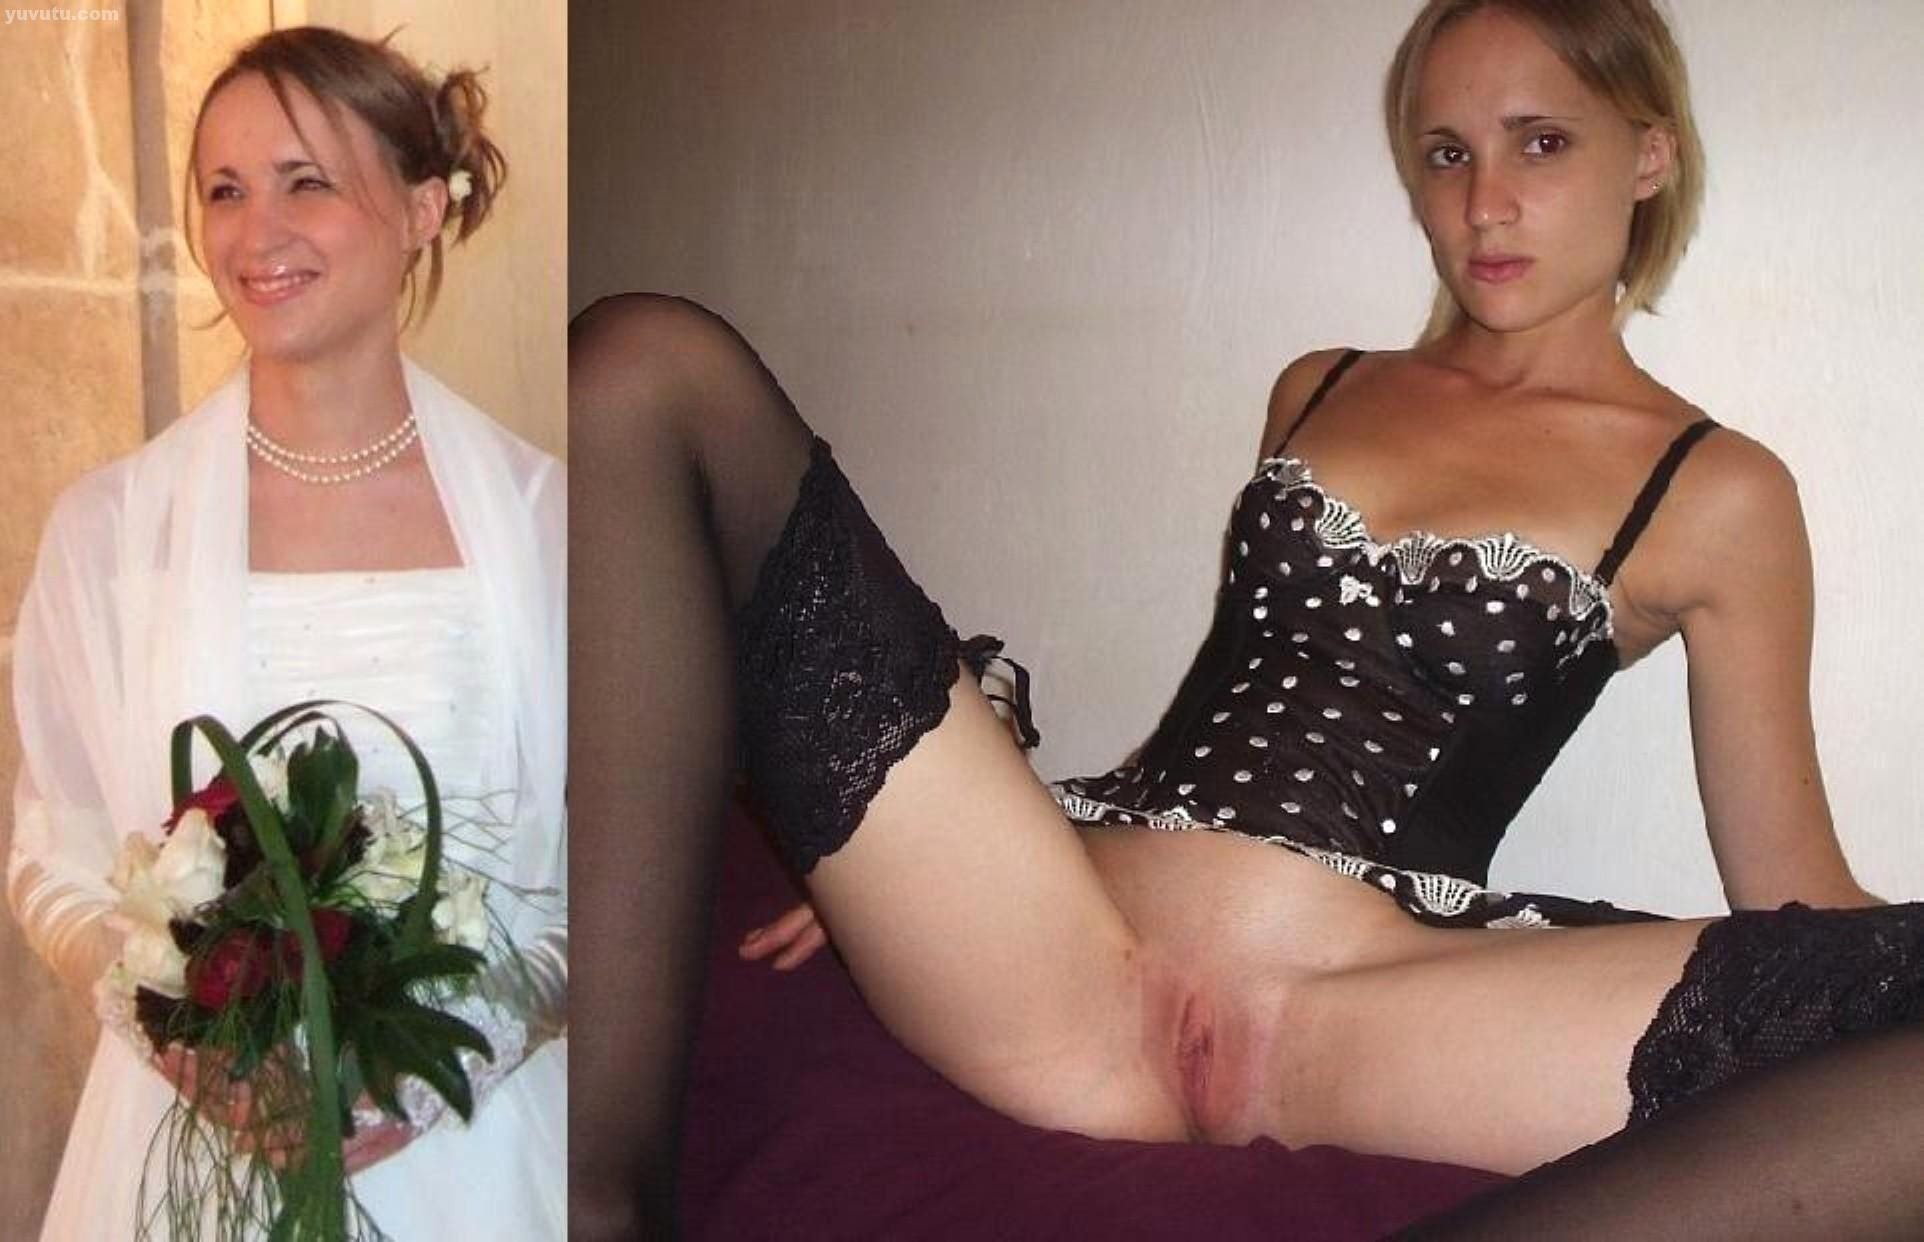 Your girlfriend before-after, dressed-undressed pic